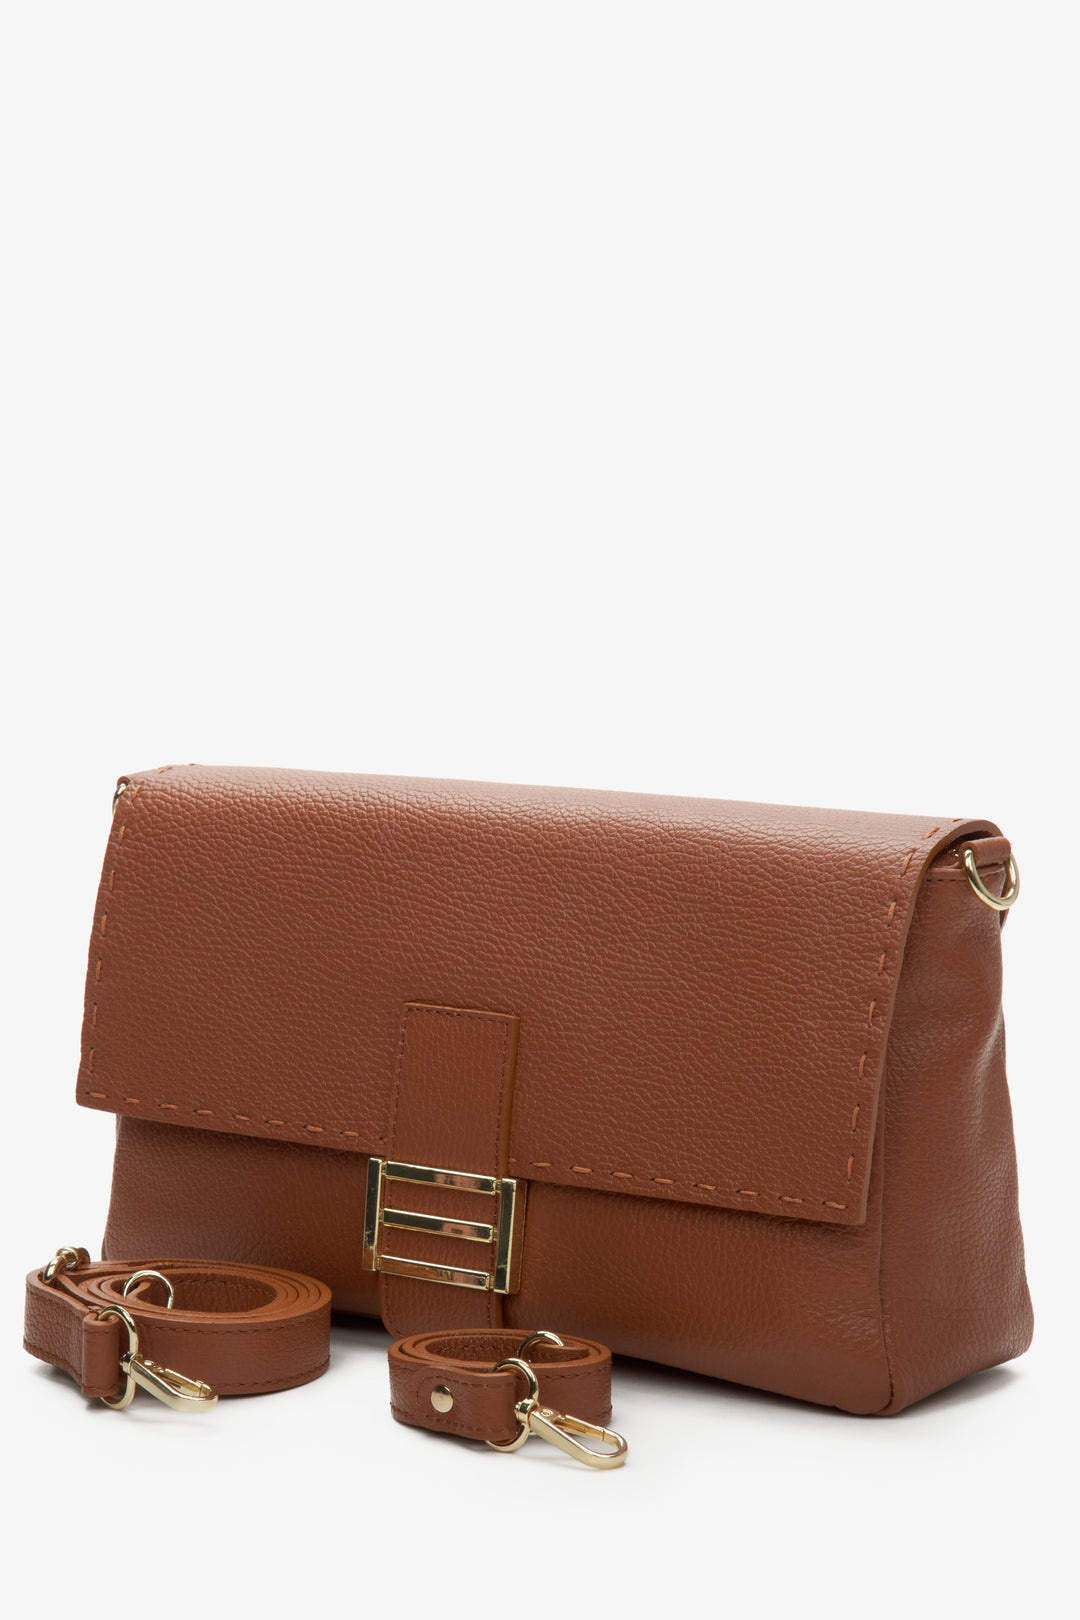 Women's brown leather handbag by Estro with golden hardware.